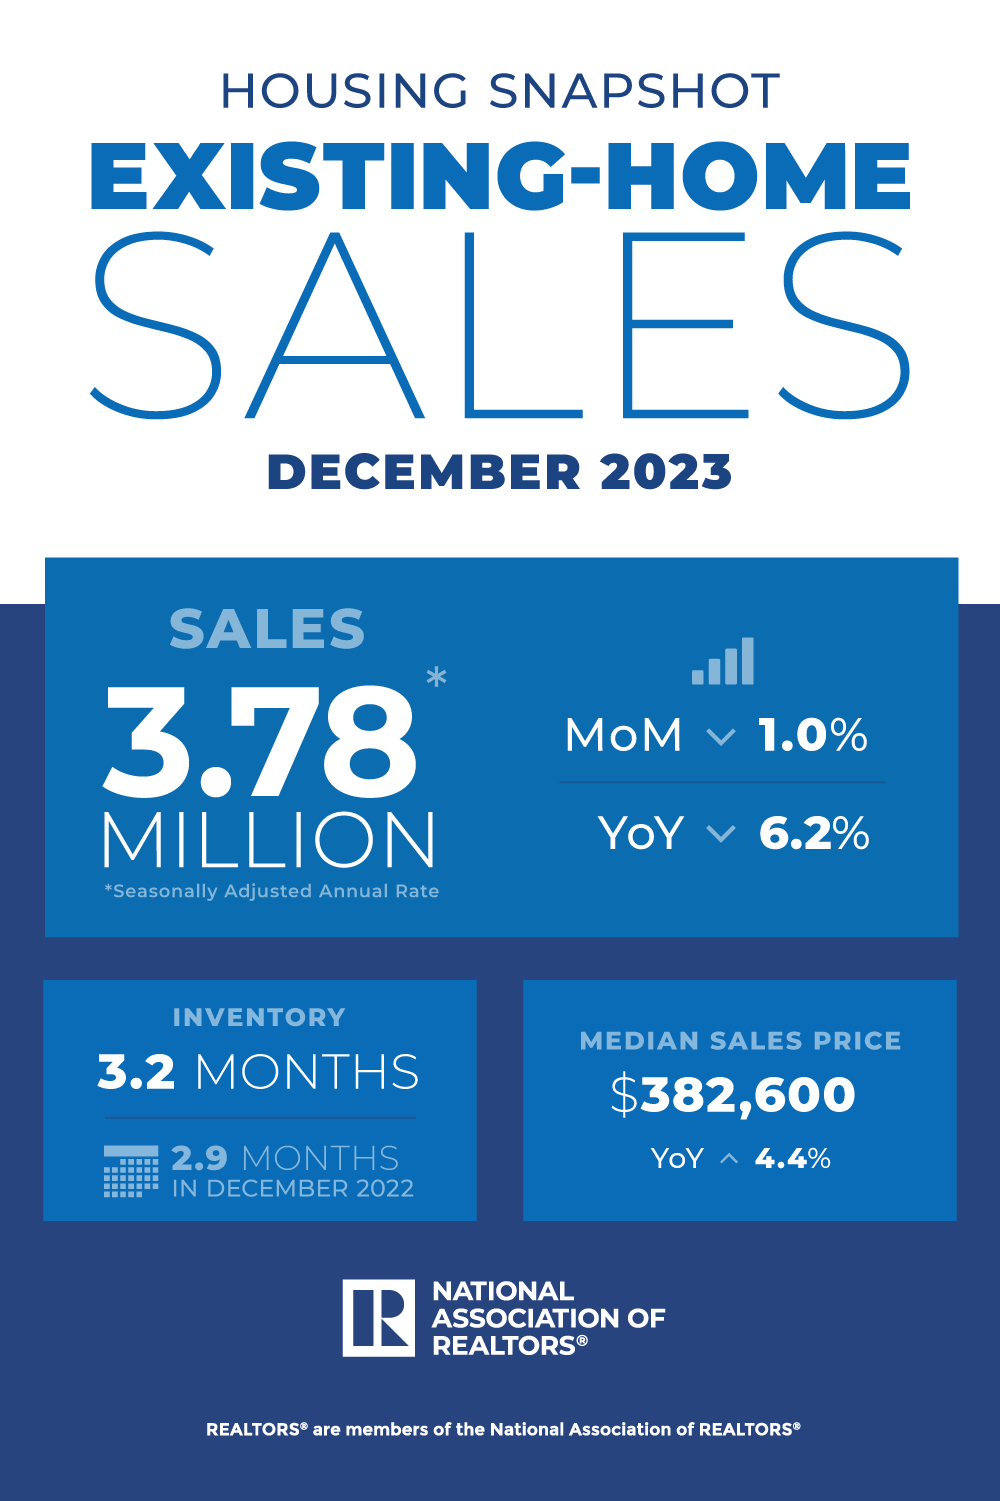 https://www.nar.realtor/infographics/existing-home-sales-housing-snapshot#:~:text=December%202023%20brought%203.78%20million,0.3%20months%20from%20December%202022.